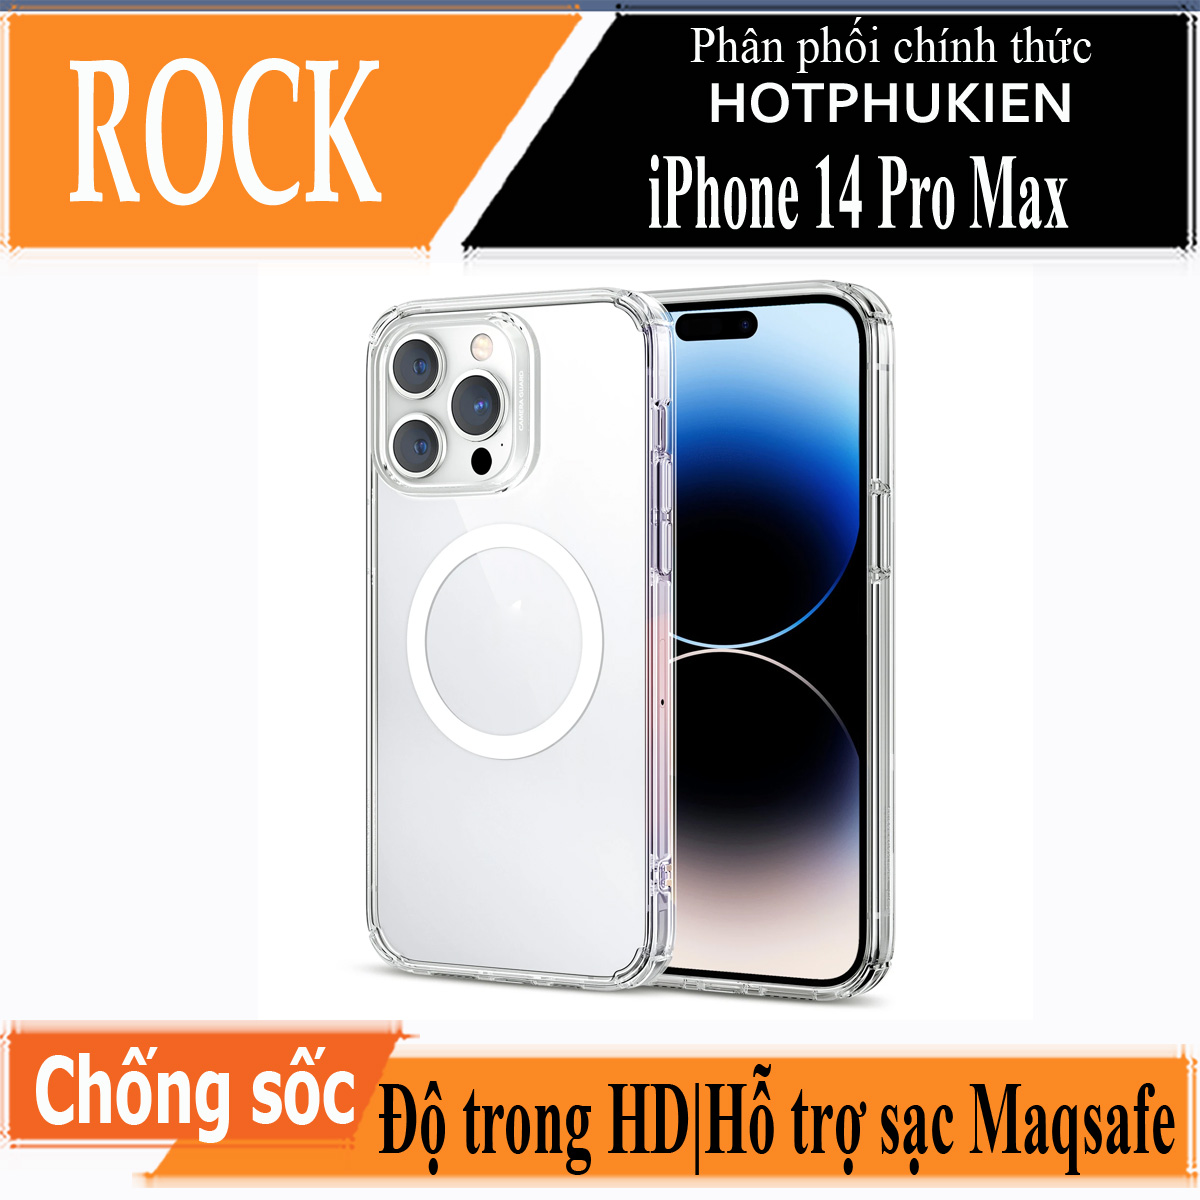 Ốp lưng chống sốc trong suốt hỗ trợ sạc Magsafe cho iPhone 14 Pro Max (6.7 inch) hiệu Rock Protection Maqsafe Magetic Case